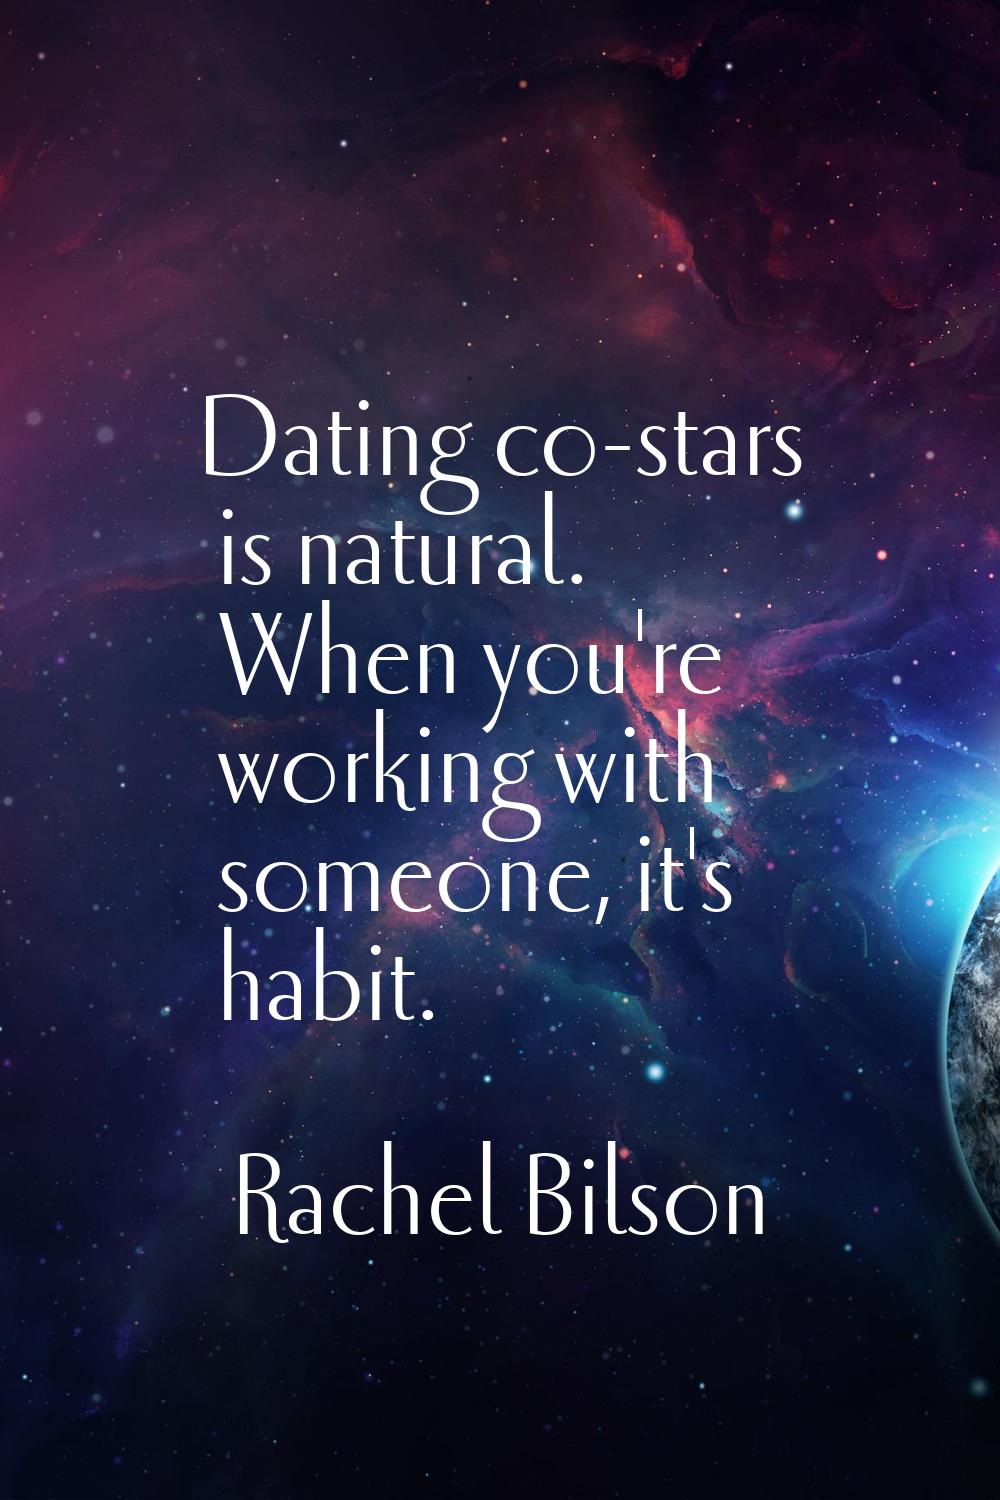 Dating co-stars is natural. When you're working with someone, it's habit.